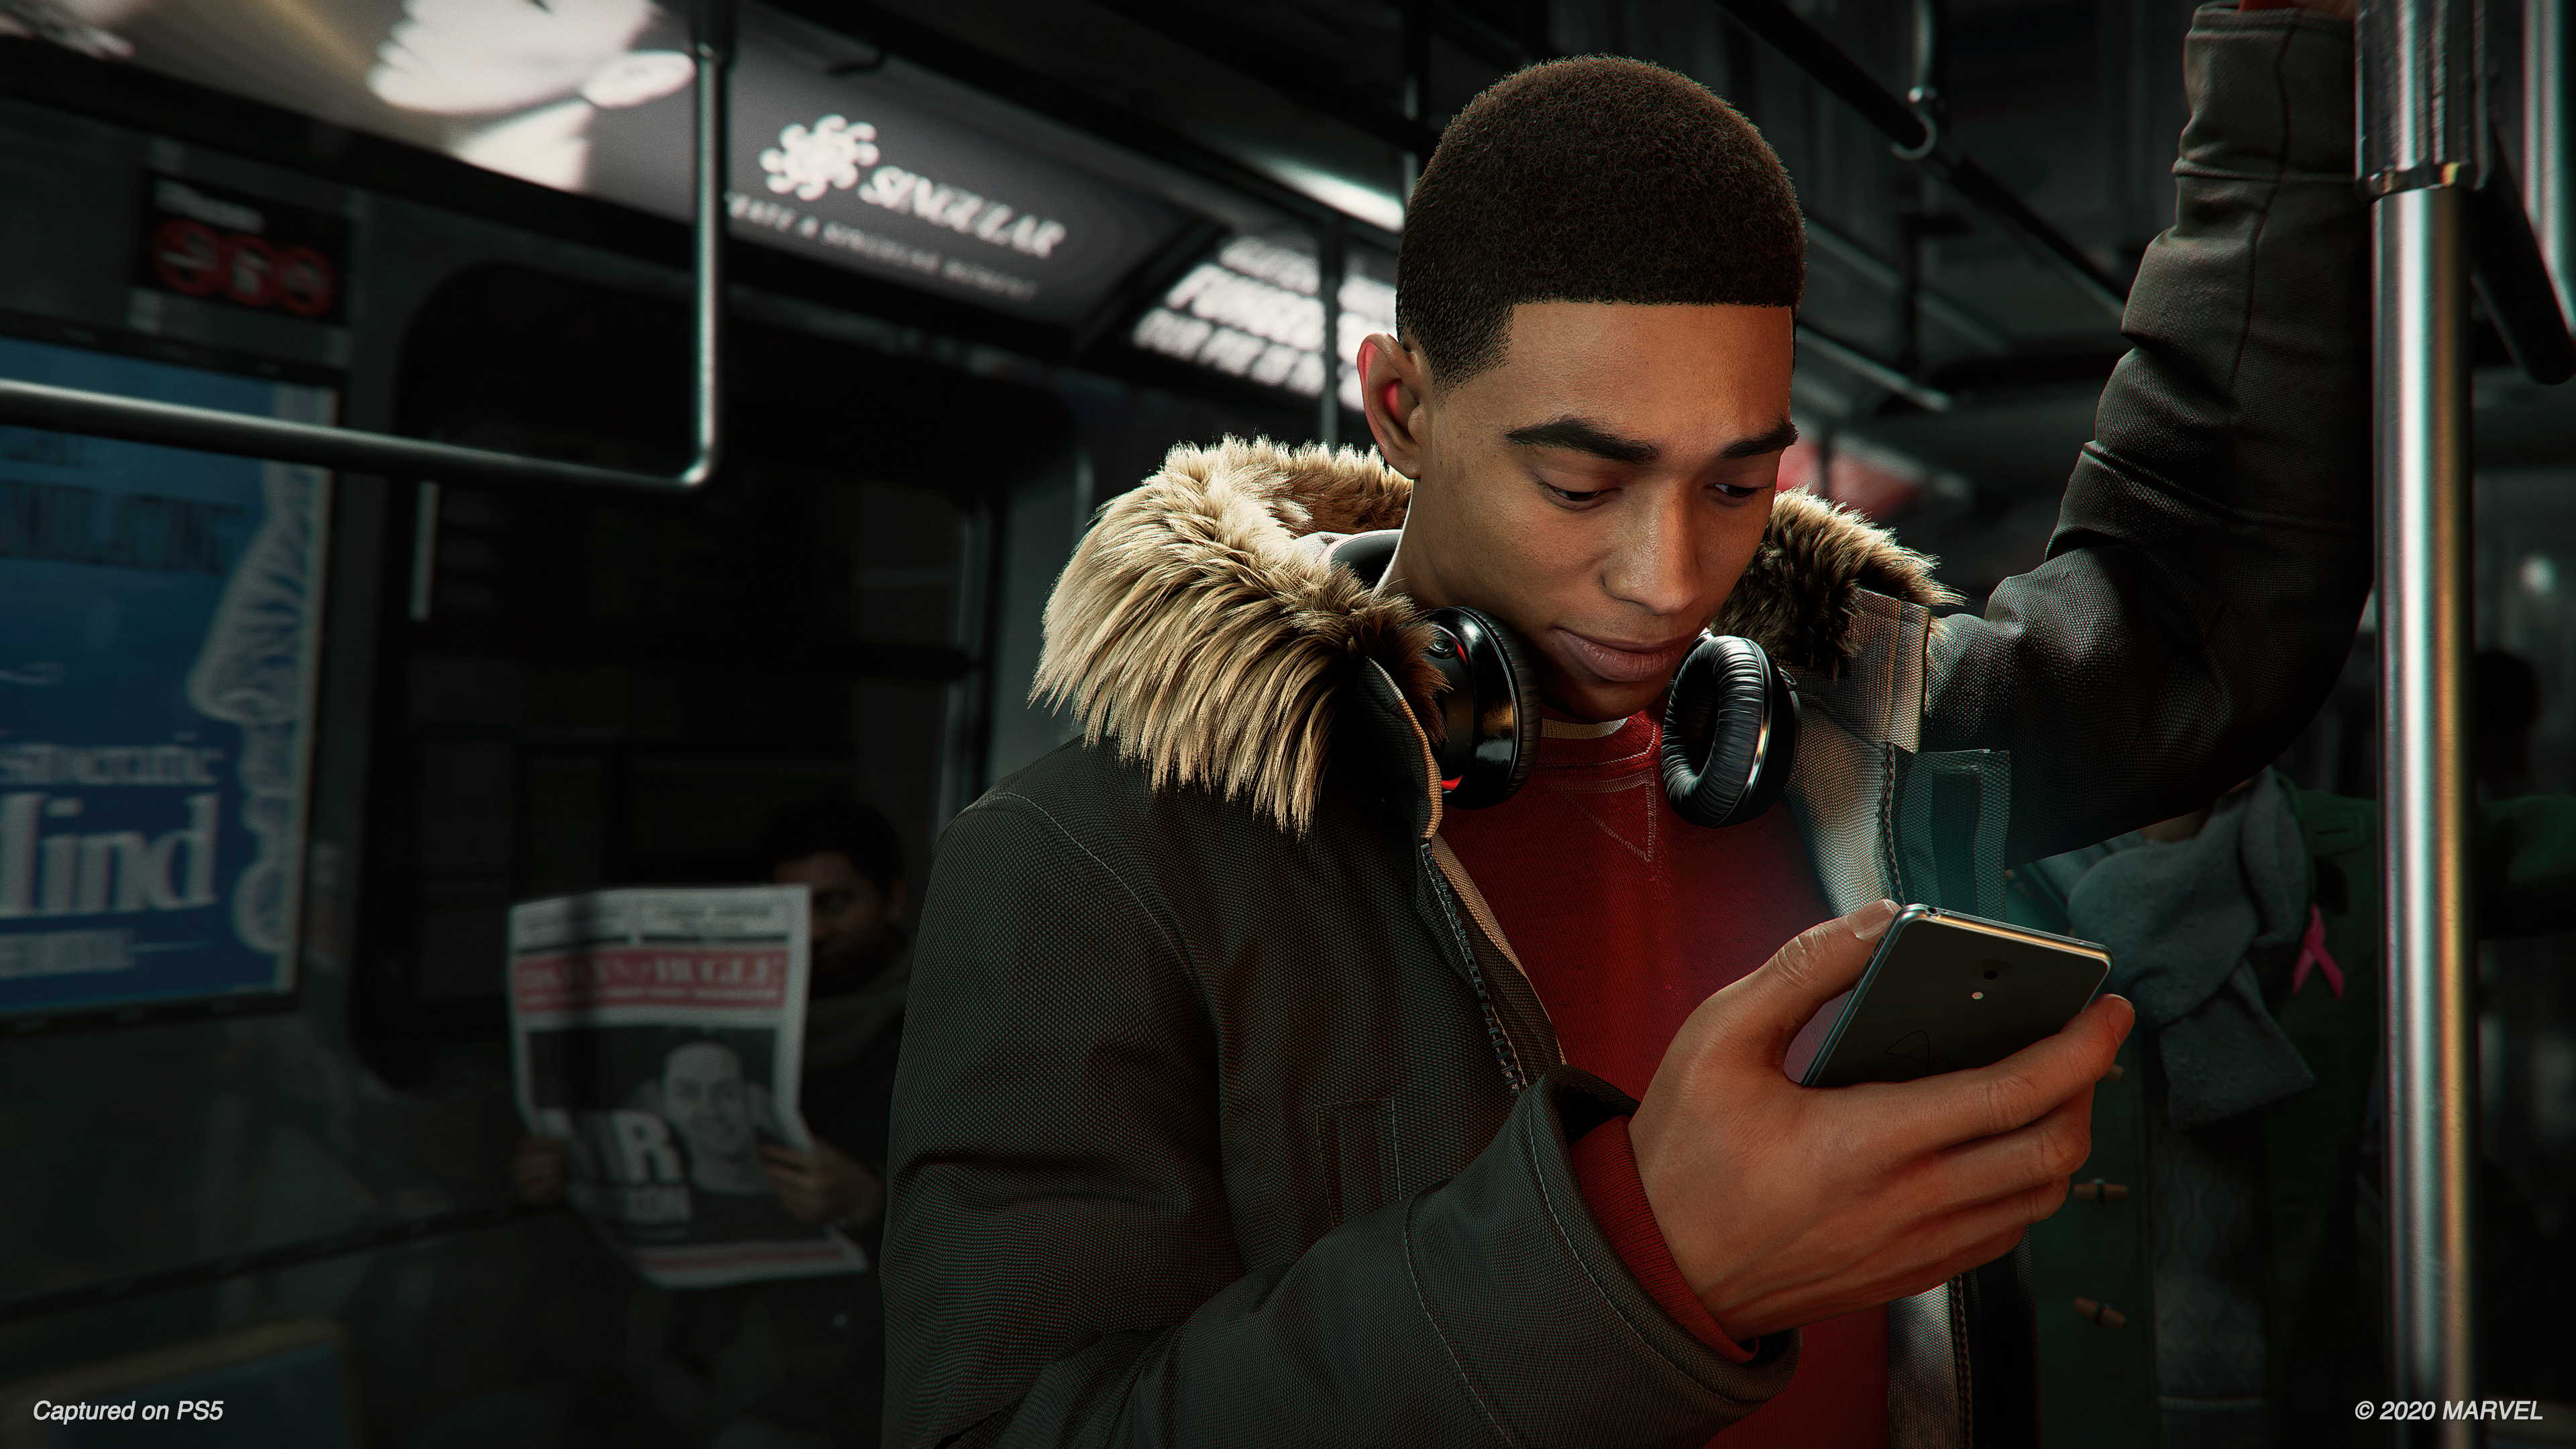 How Old Is Miles Morales in Spider-Man PS5?